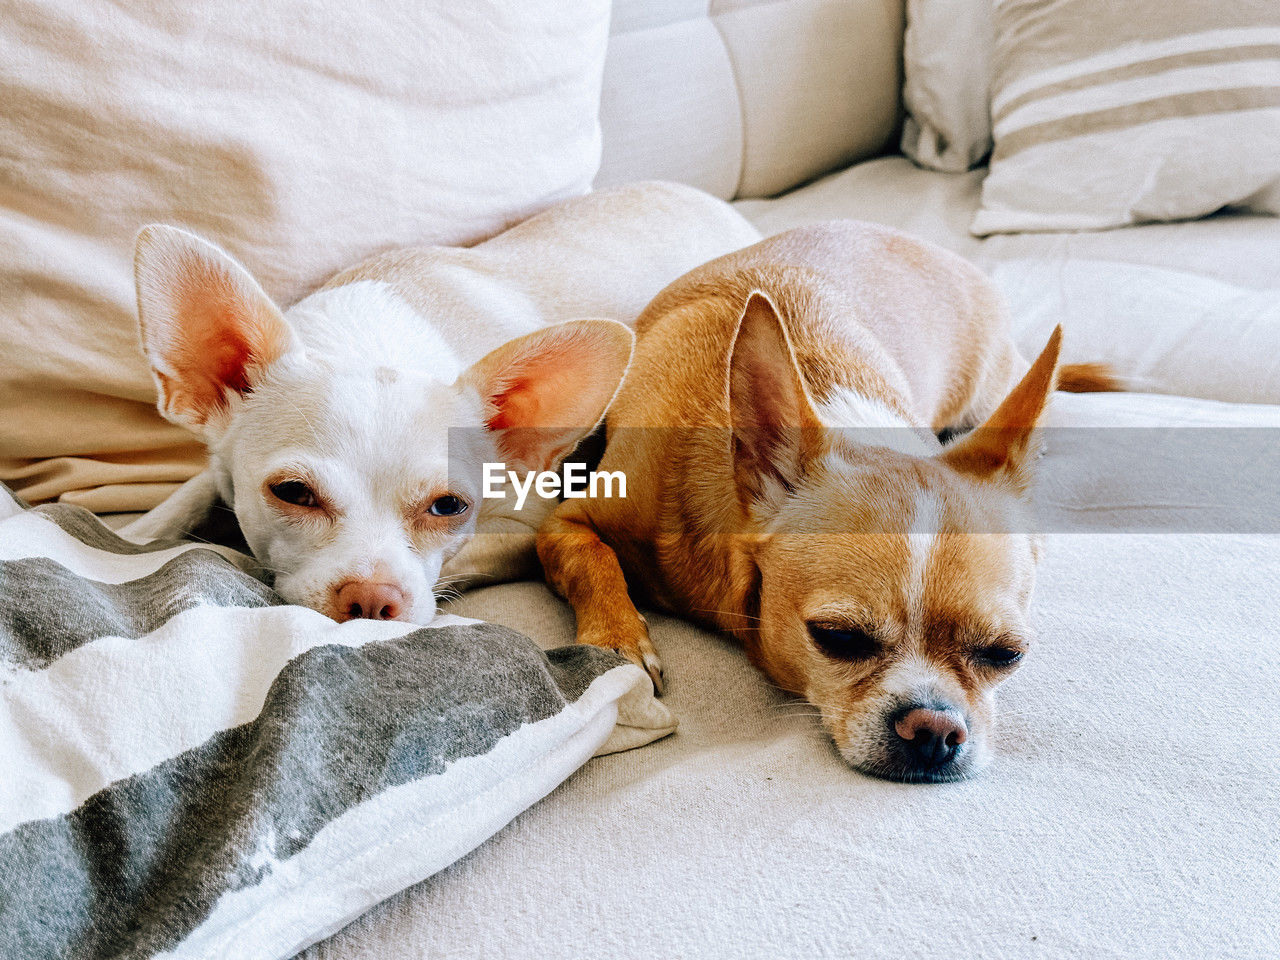 mammal, domestic animals, pet, animal themes, animal, dog, canine, one animal, chihuahua, furniture, lap dog, relaxation, indoors, no people, lying down, bed, puppy, resting, sofa, portrait, home interior, cute, young animal, blanket, high angle view